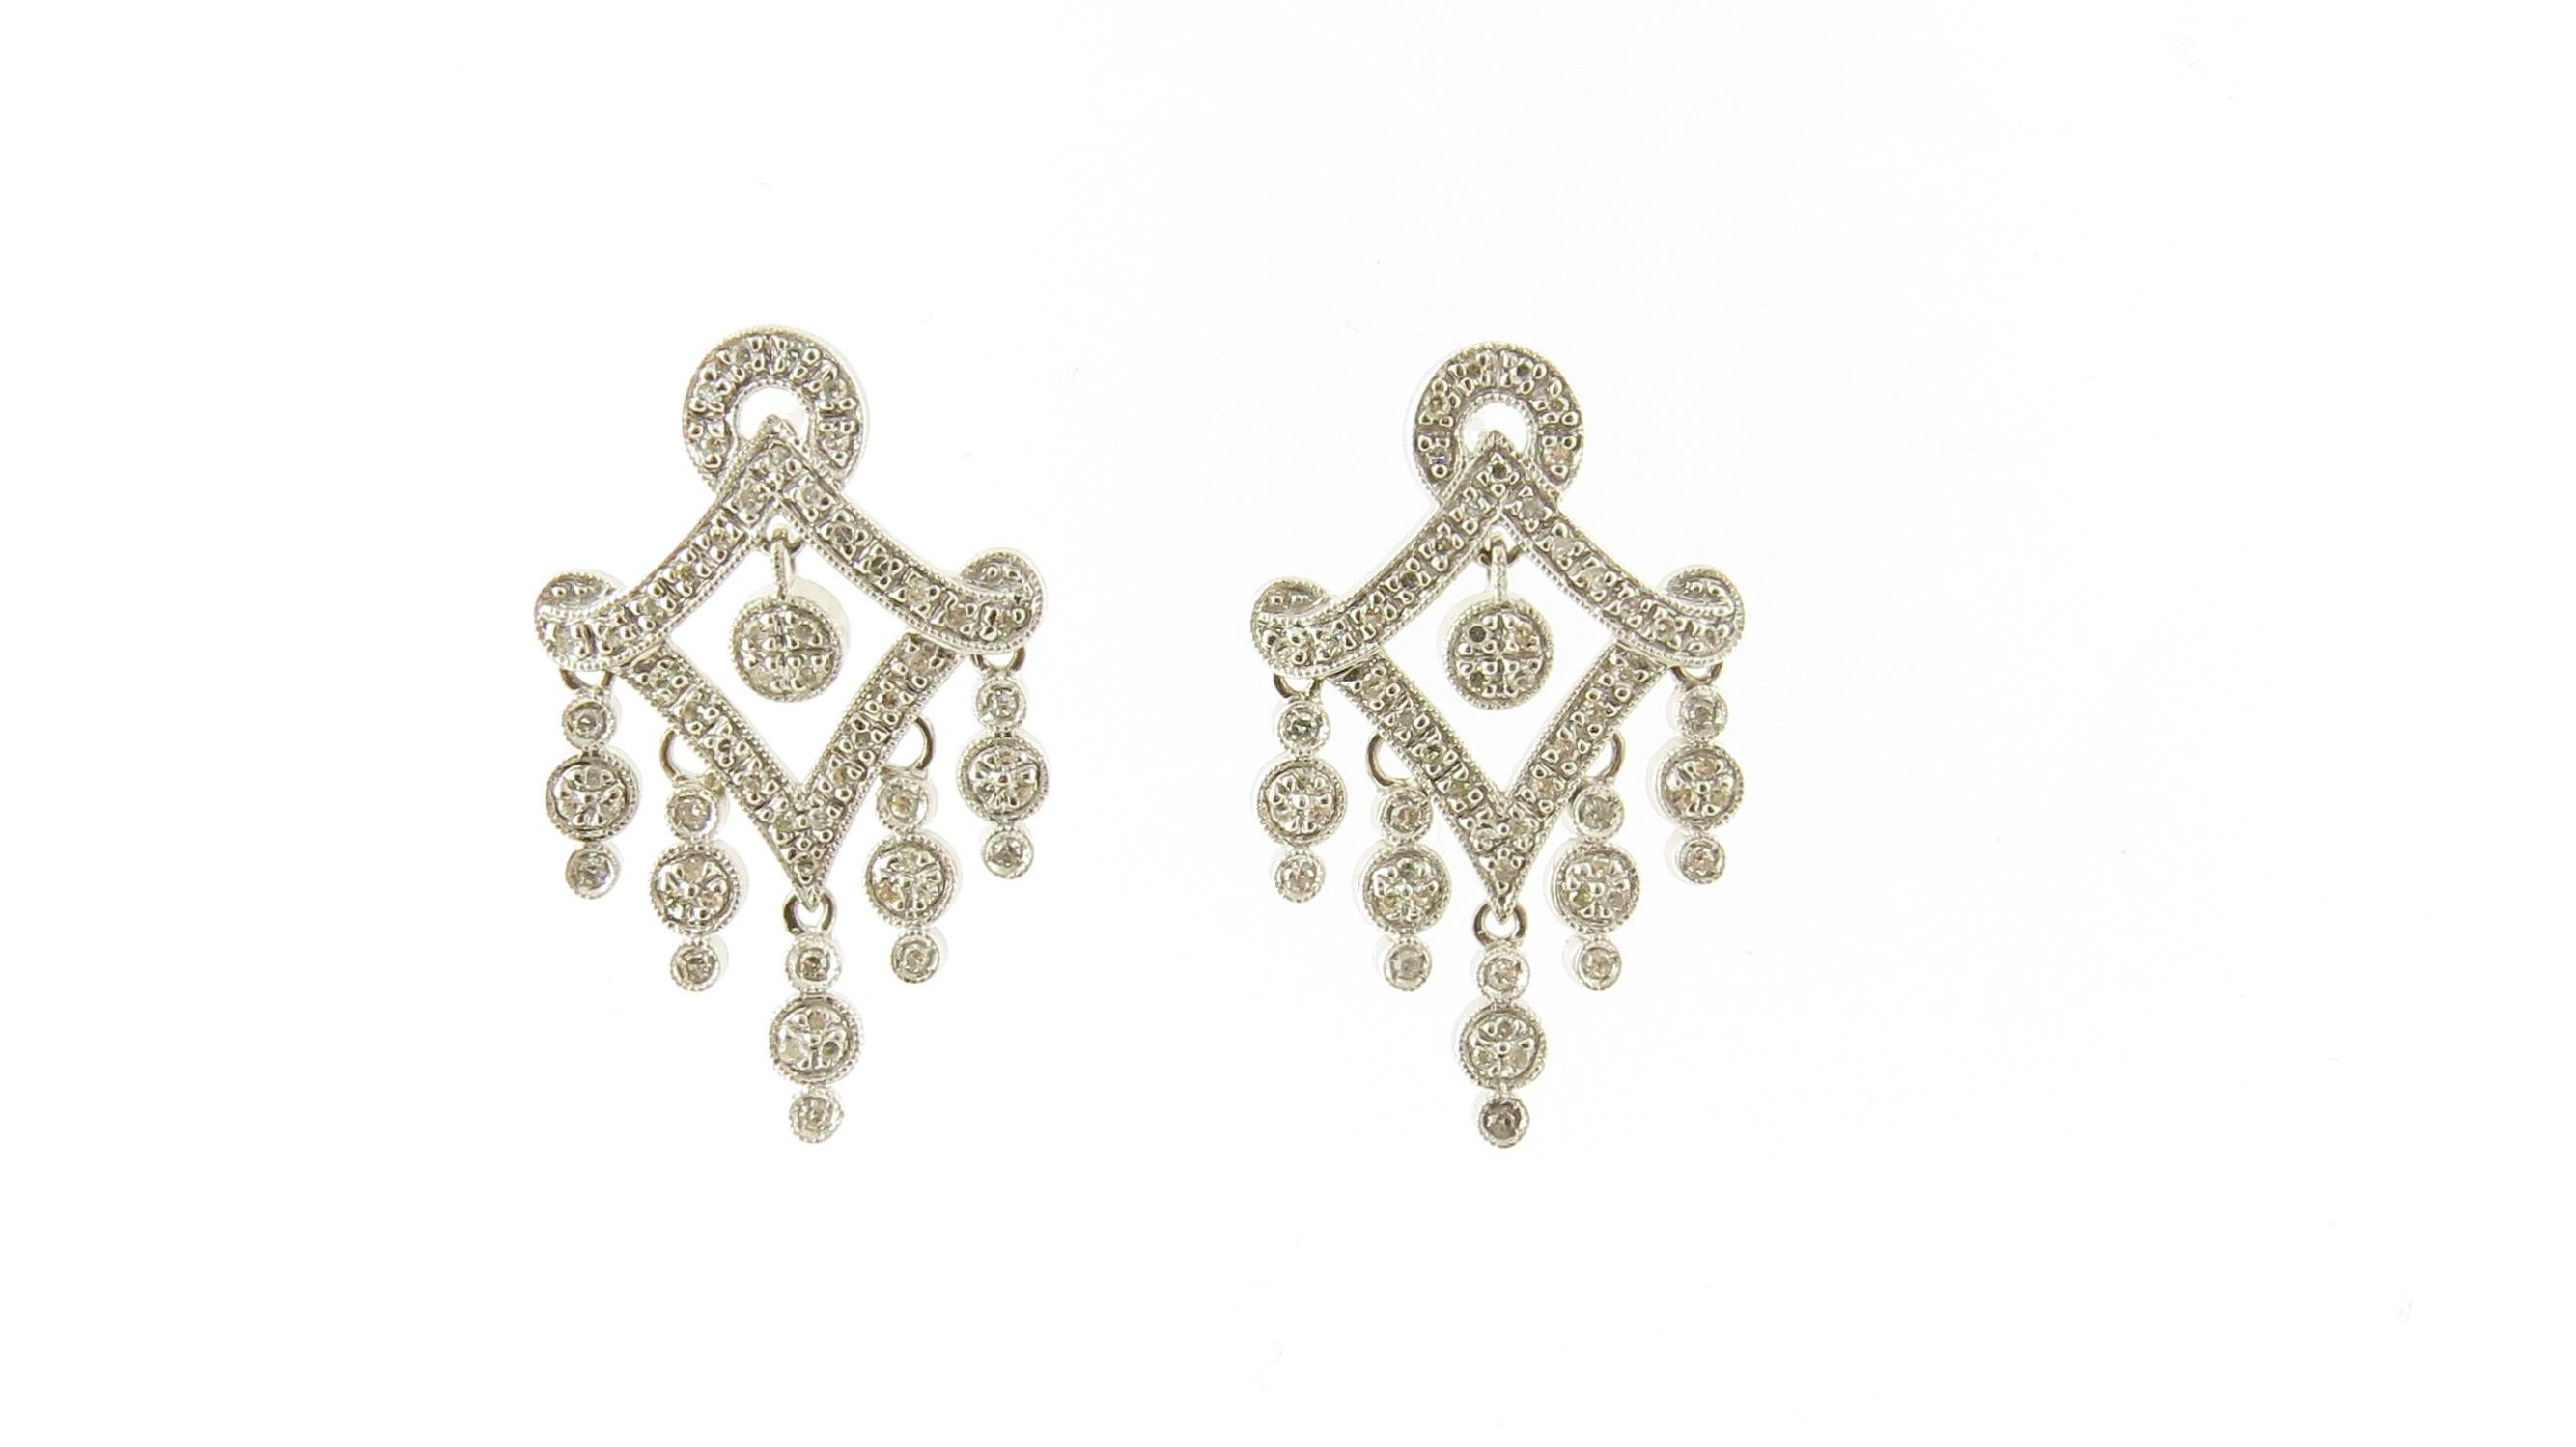 Vintage 14 Karat White Gold and Diamond Chandelier Earrings

These sparkling chandelier earrings each feature 59 single-cut diamonds set in classic 14K white gold. Push back closures.

Approximate total diamond weight: .60 ct.

Diamond color: